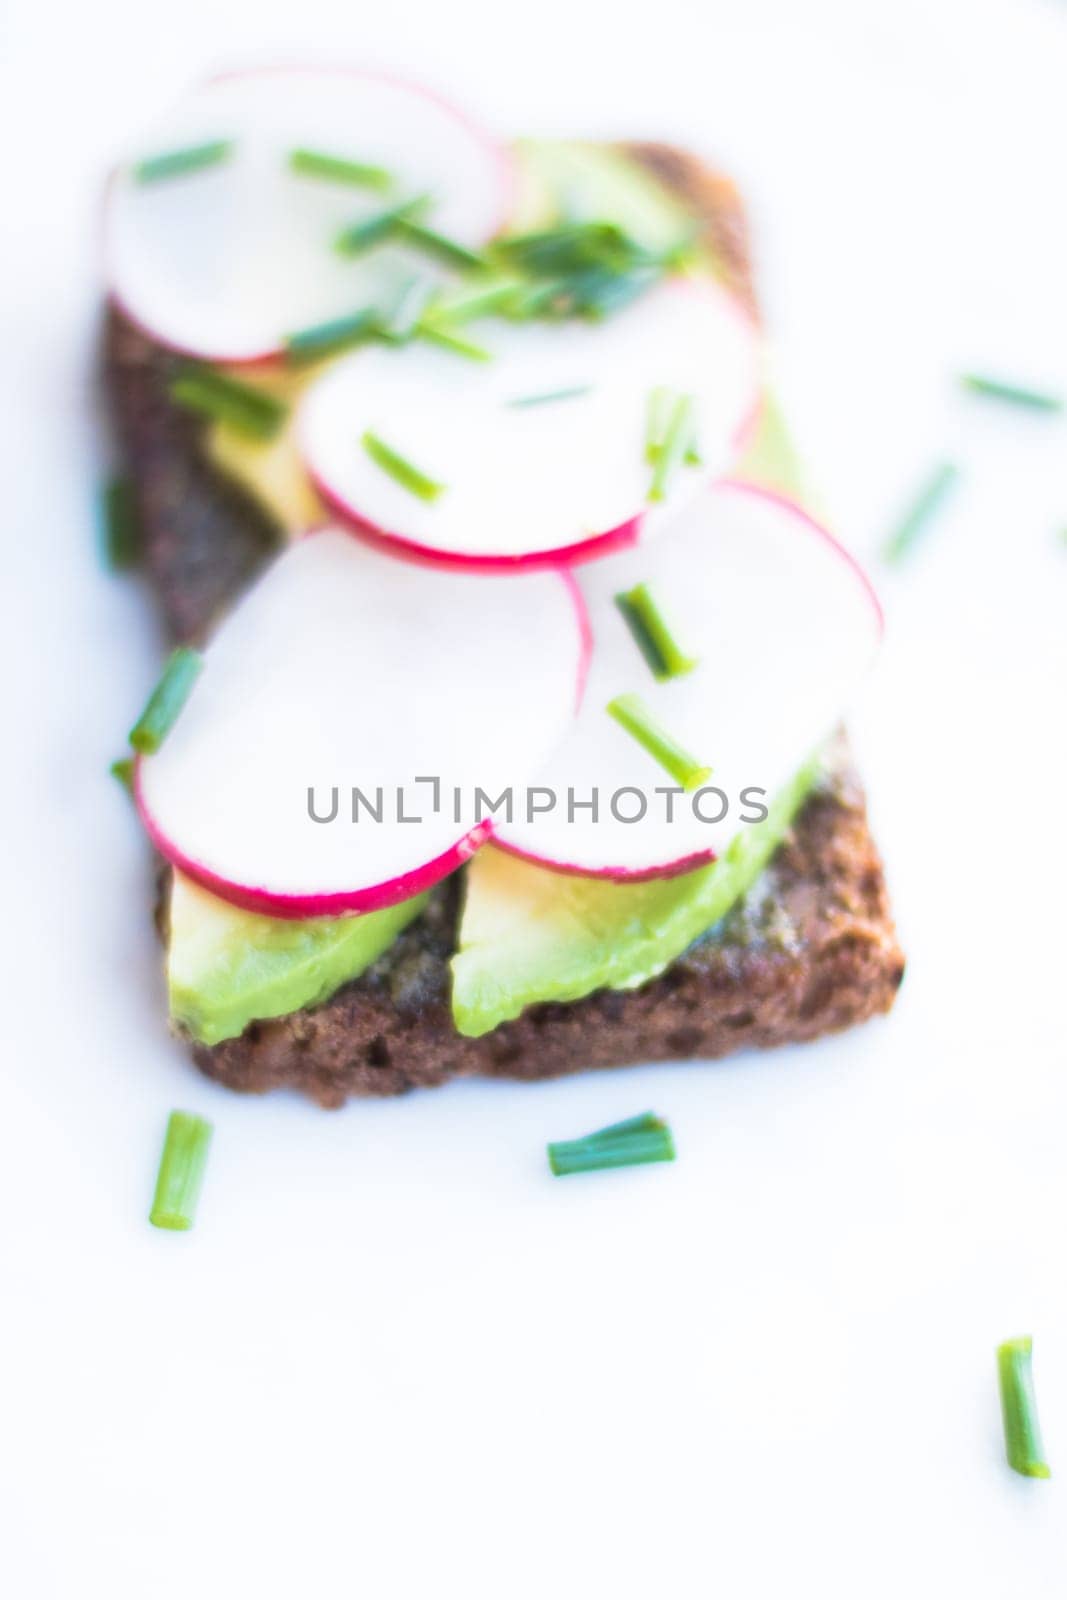 vegetable sandwich - healthy snacks and homemade food styled concept, elegant visuals